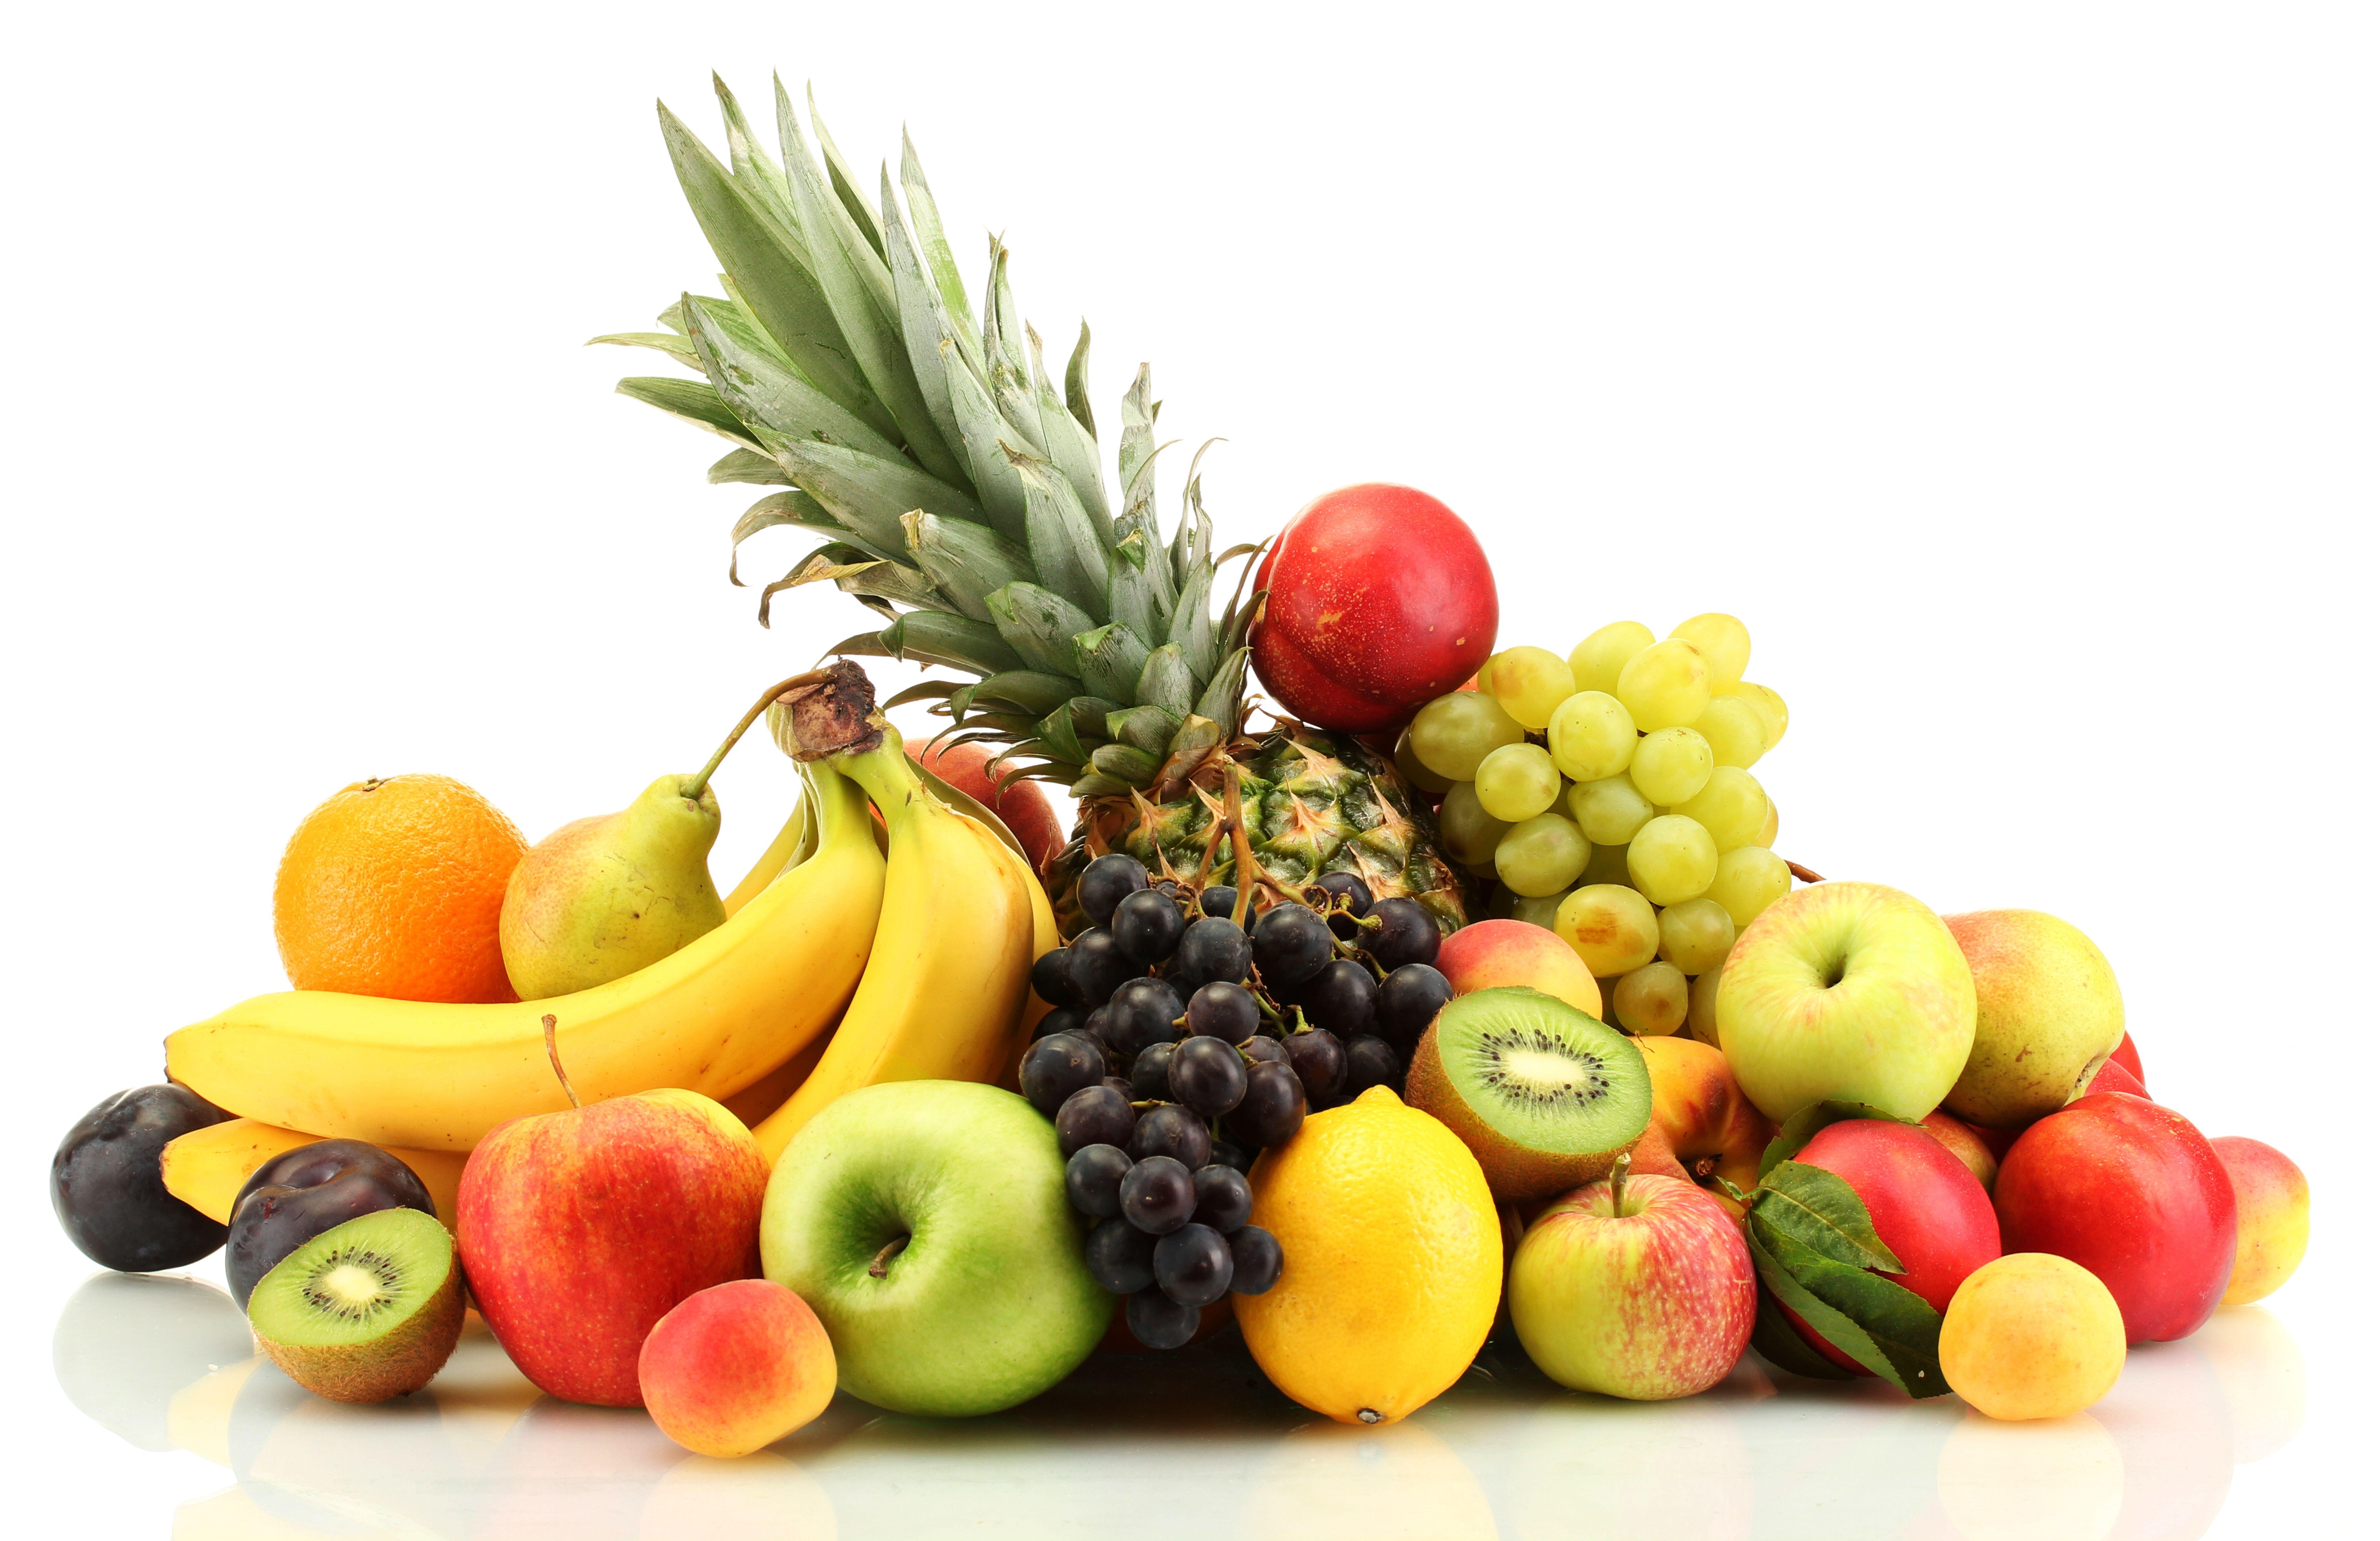 fruits hd images